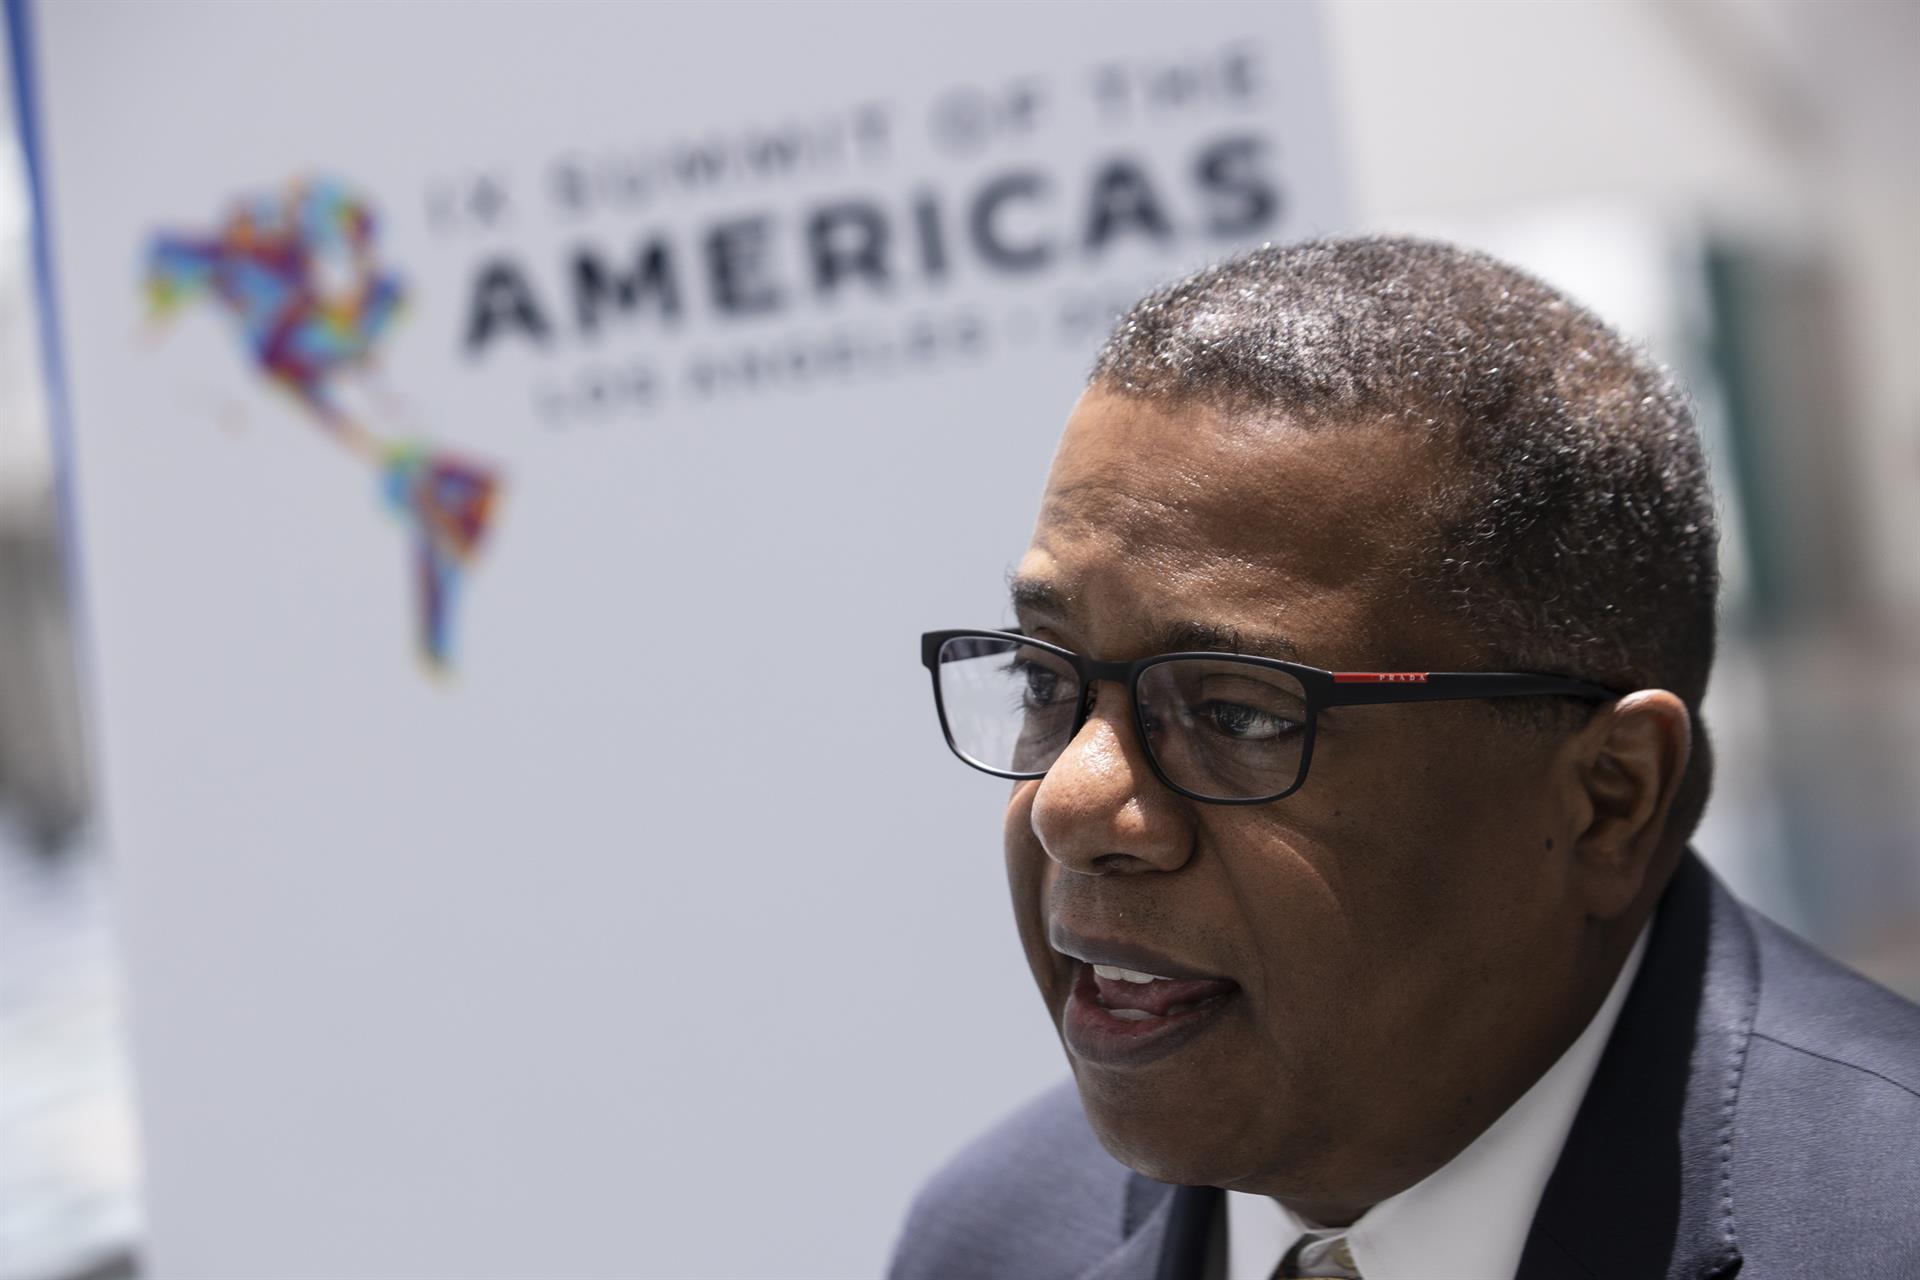 US Undersecretary of State for the Western Hemisphere Brian Nichols during the Summit of the Americas. Photo: EFE/Alberto Valdés.